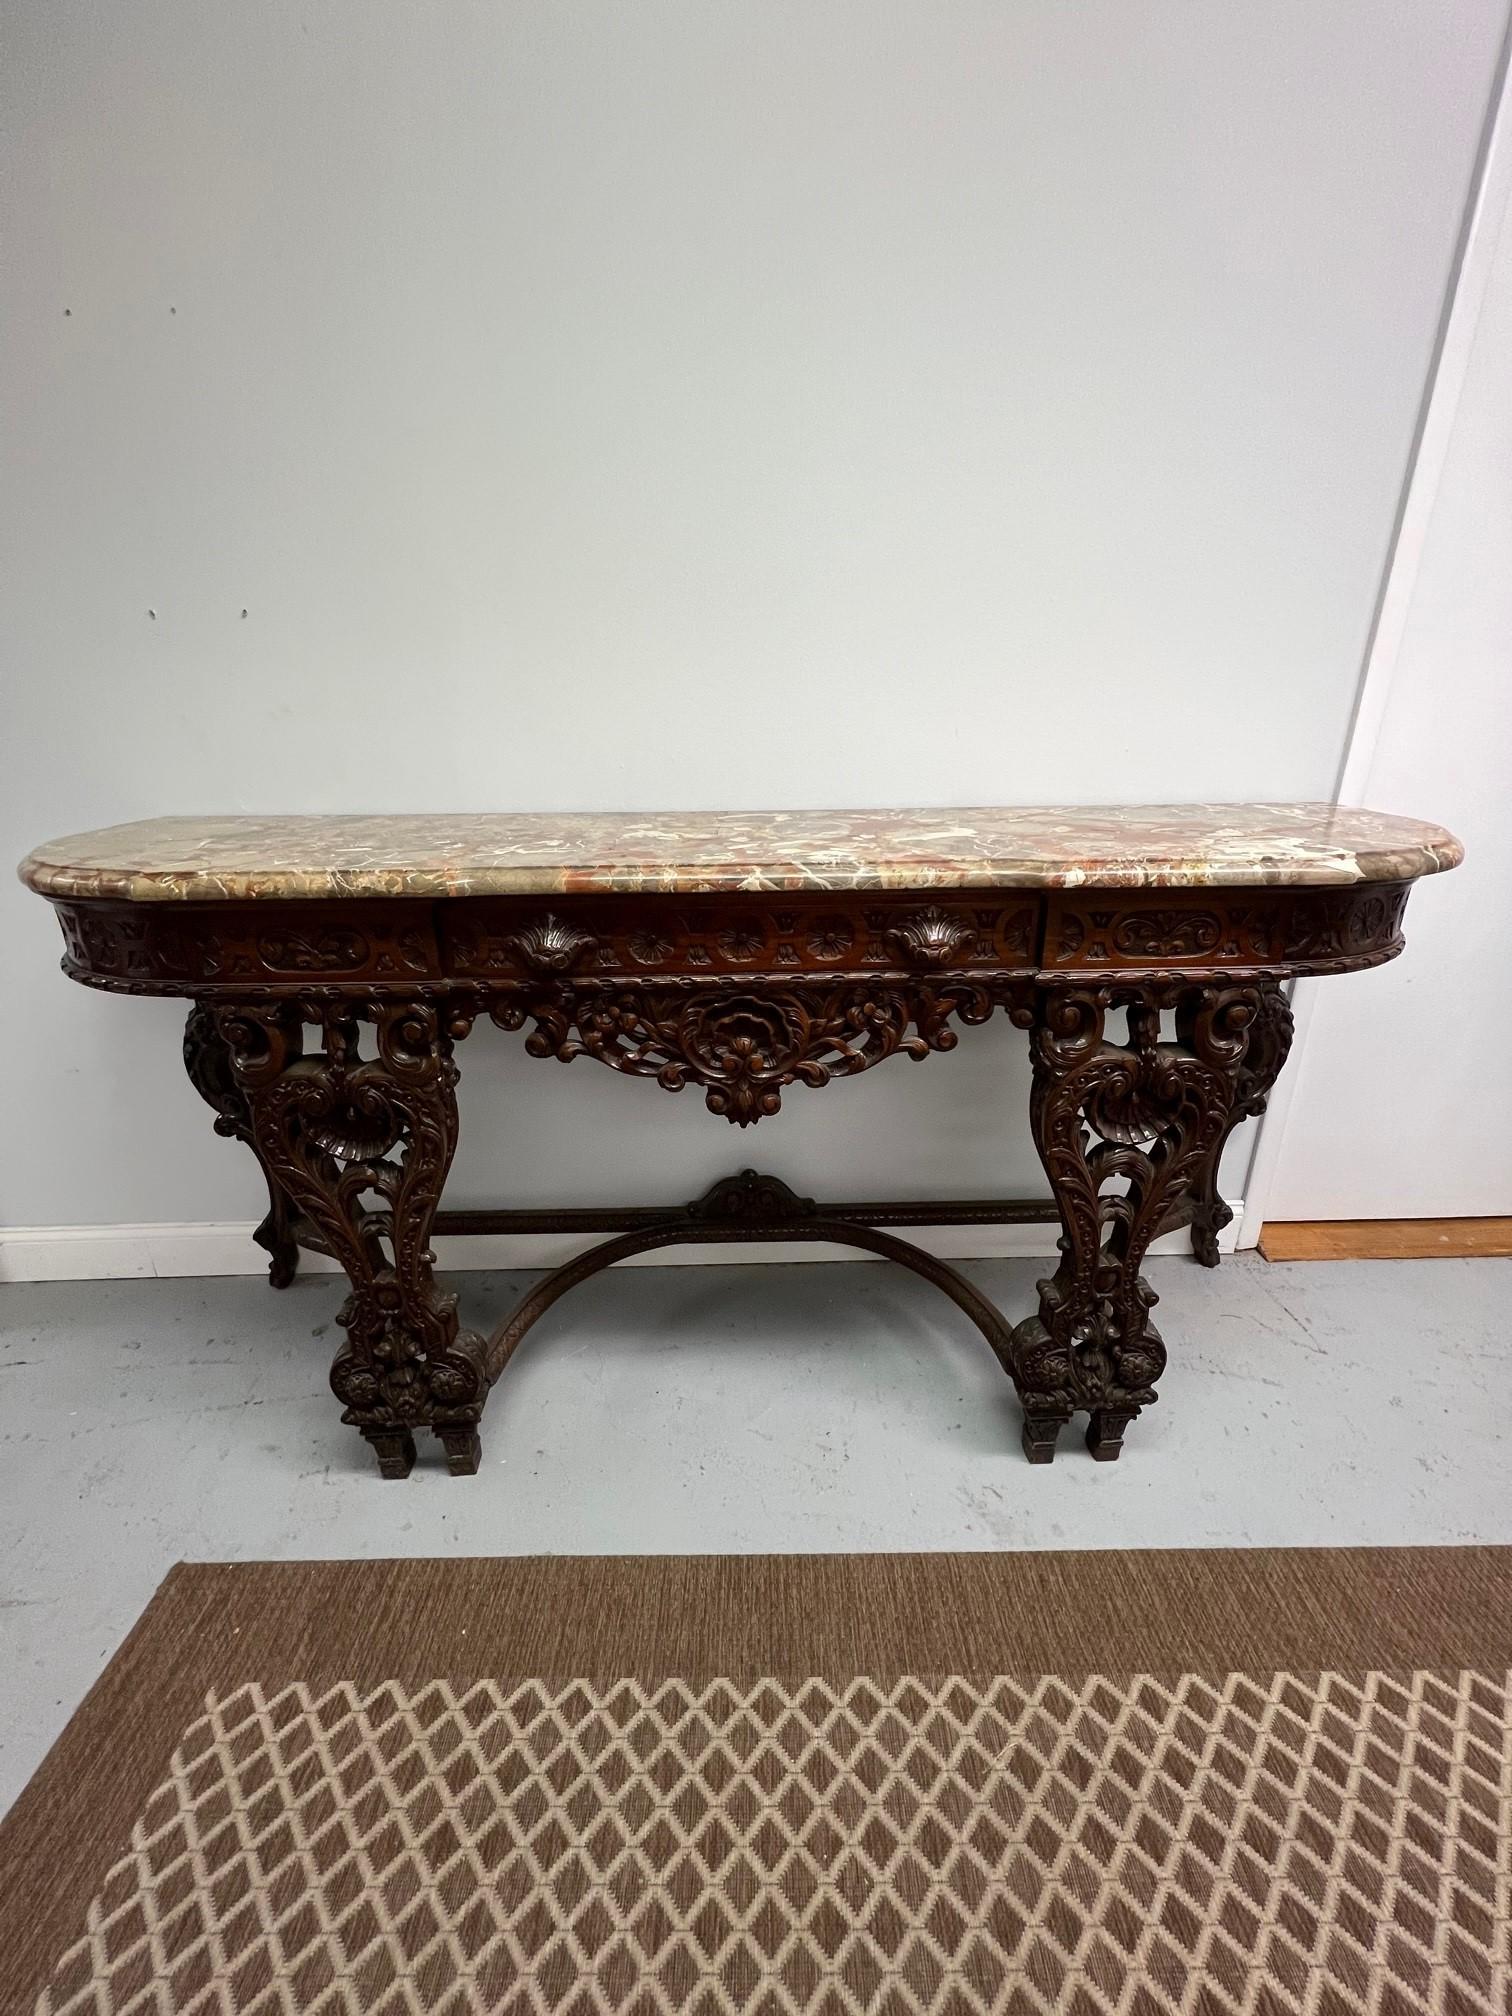 This beautiful carved wood marble top server with a single drawer has an unique marble top with many colors. At one time this was one of many pieces from a magnificent dining room set. The carving on this server is amazing as shown in the photos.